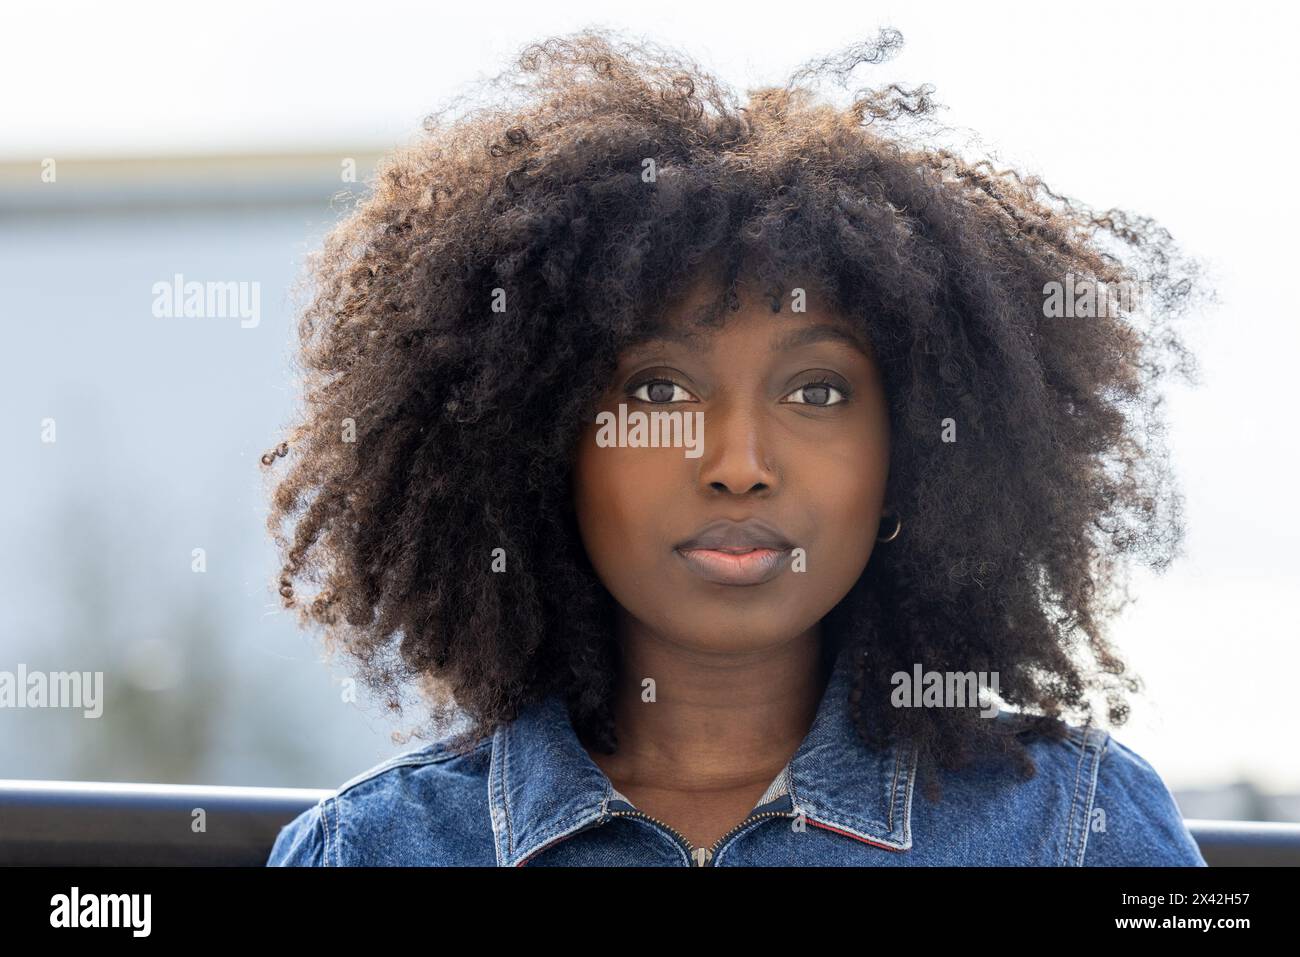 The photograph captures a headshot of a young African woman in a denim jacket, playfully puffing her cheeks. Her curly, voluminous hair frames her face, highlighted by soft, natural light. Portrait of a Playful Young African Woman with Curly Hair and Denim Jacket. High quality photo Stock Photo